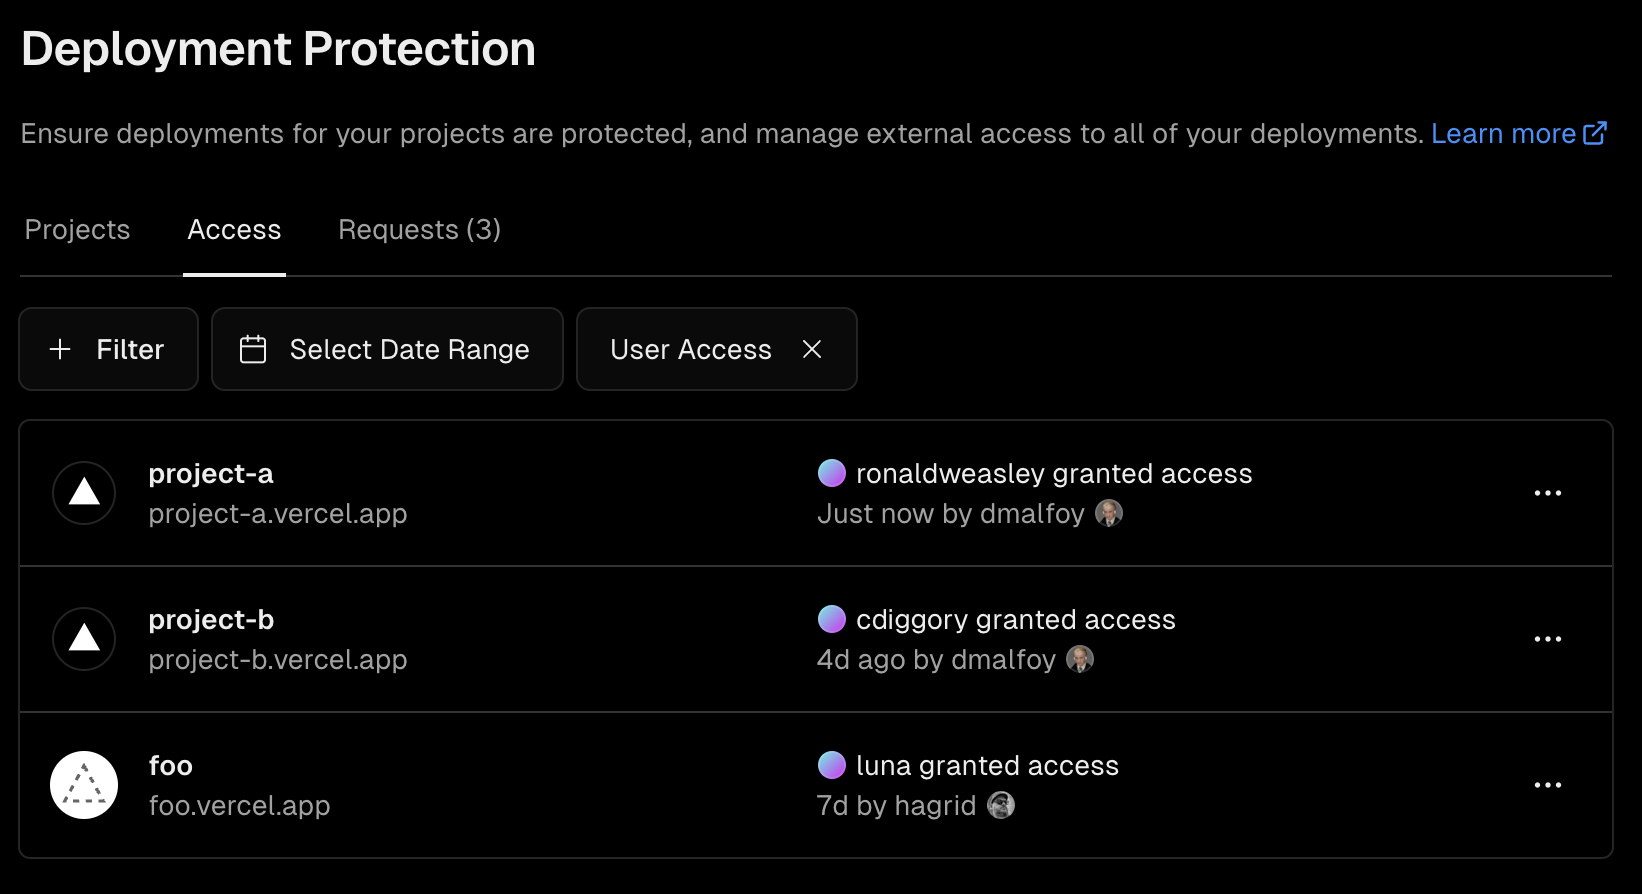 Granted access requests can be managed on the Dashboard > Settings > Deployment Protection > Access section.